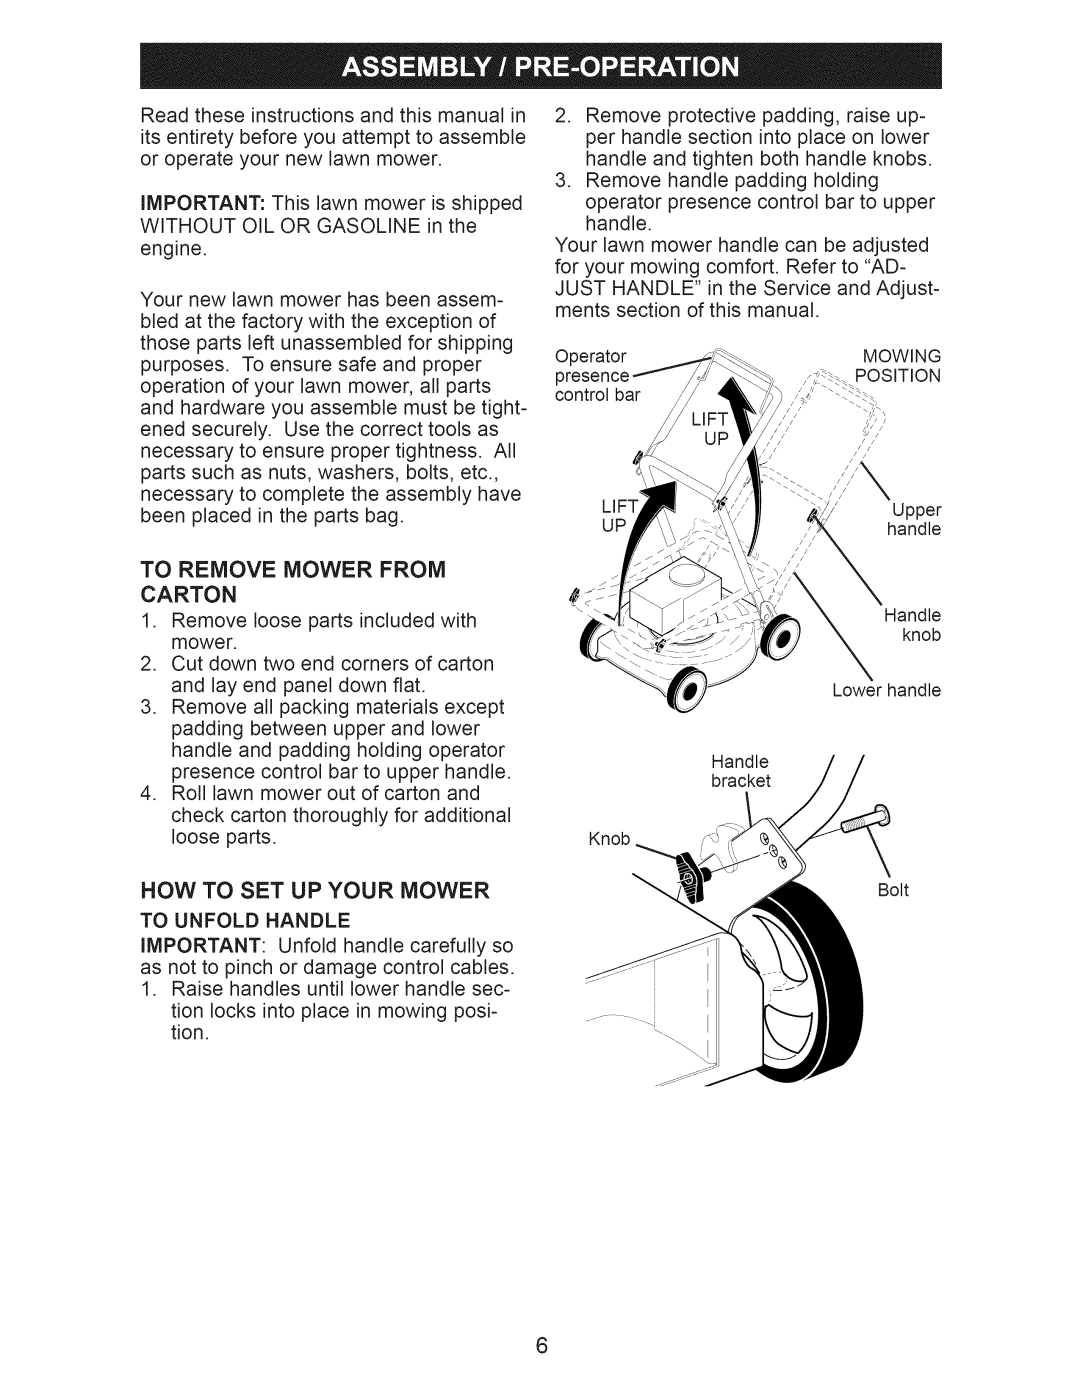 Craftsman 917.374061 owner manual Now To Set Up Your Mower, To Remove Mower From Carton 